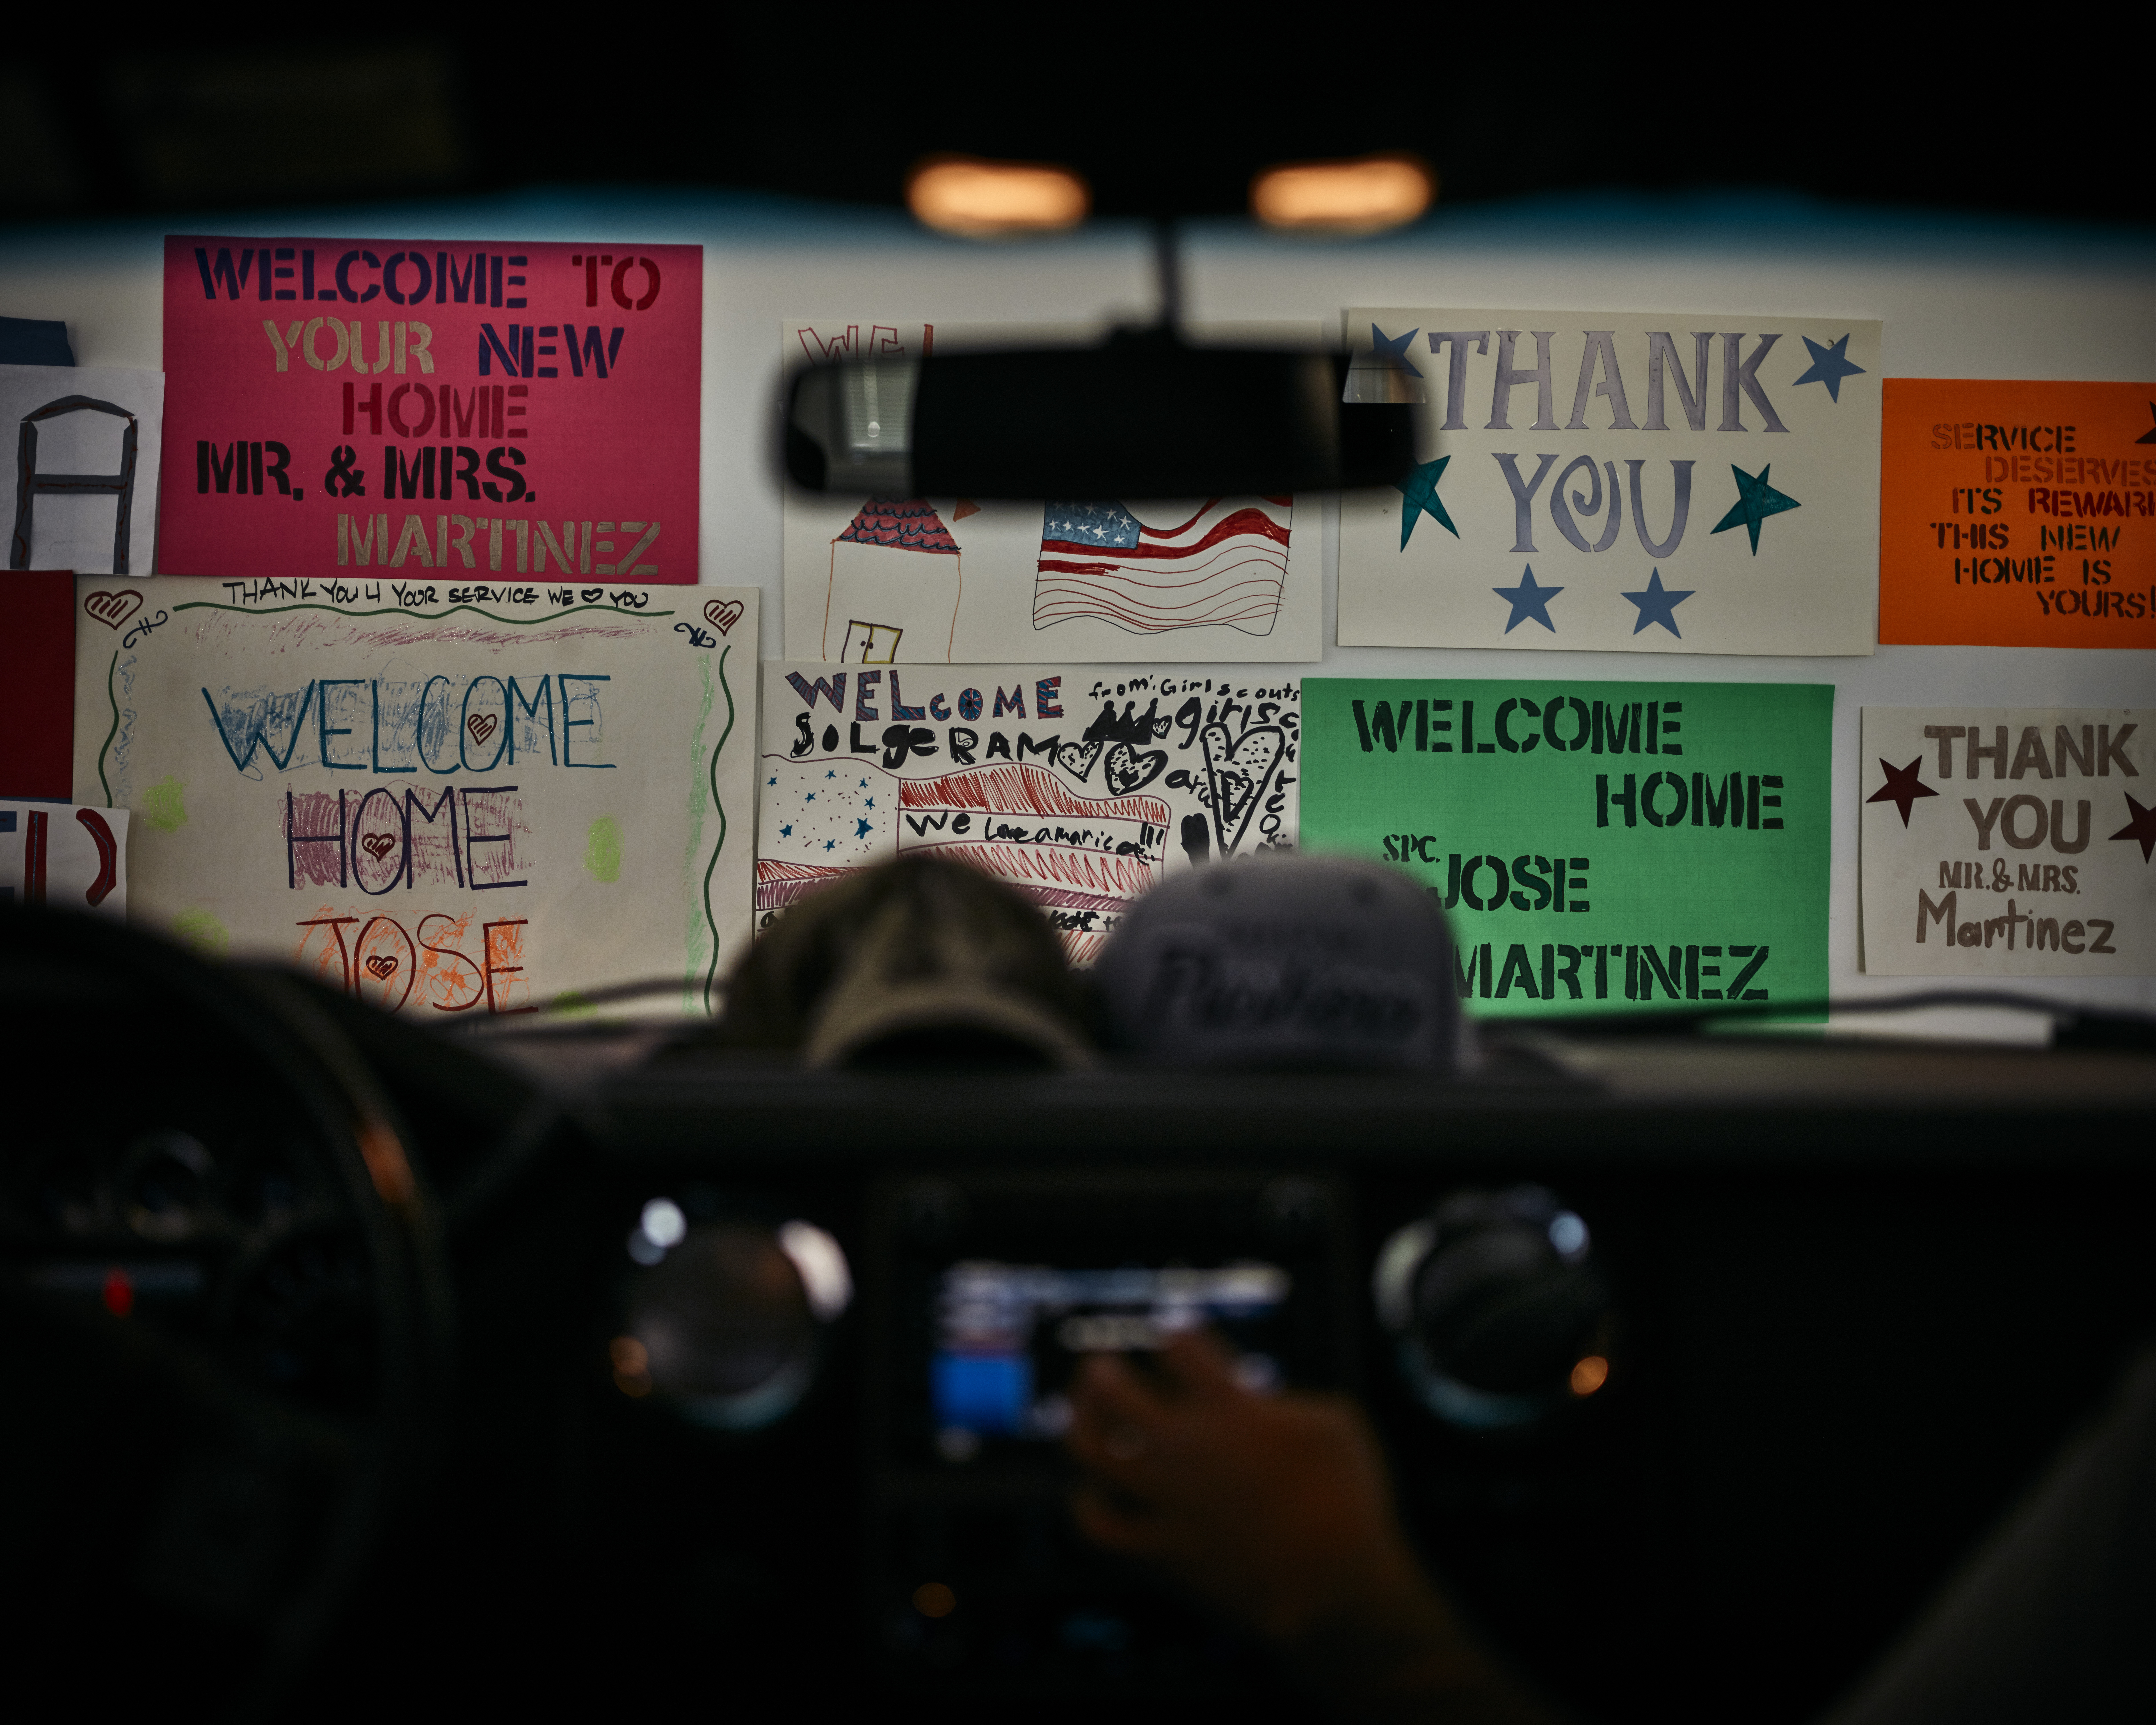 Well-wishes and thank you notes written by community members on the garage wall of US Army veteran Jose Martinez at his home in Apple Valley, California, June 17, 2016.